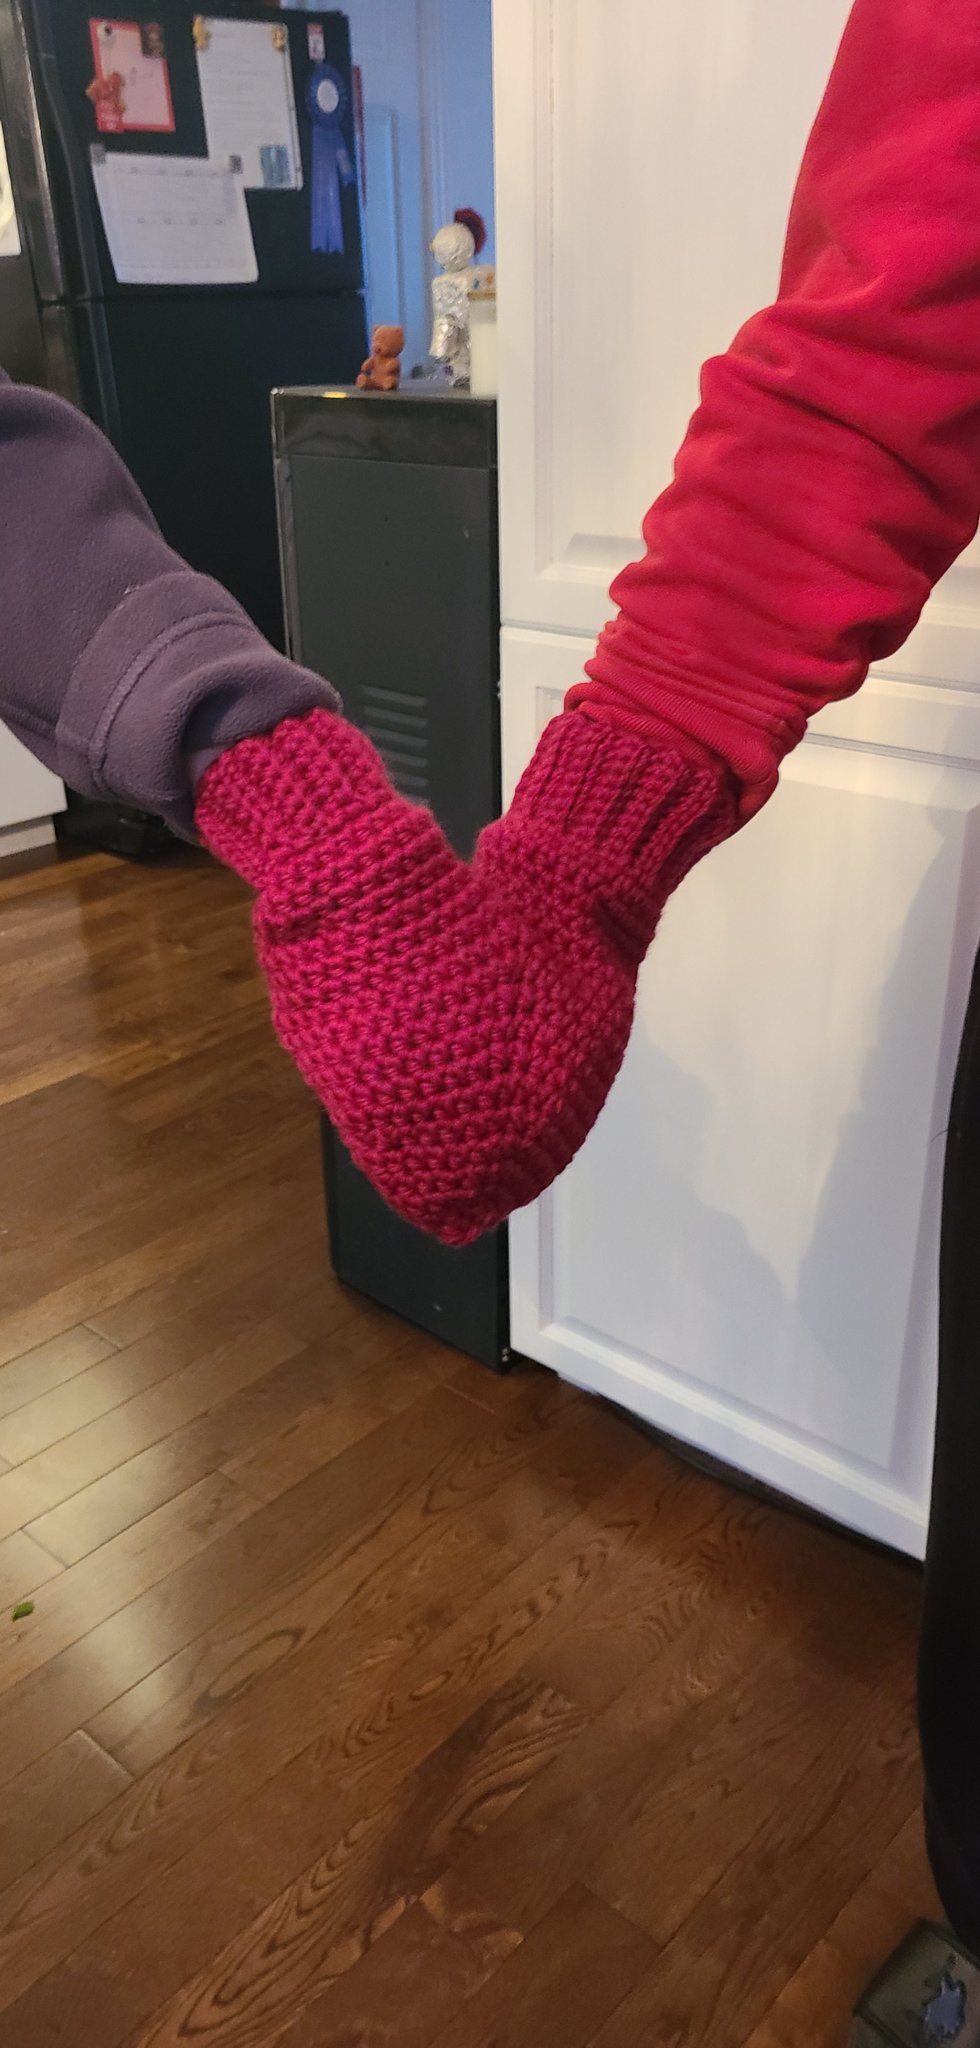 Mr Boof On Twitter My Mom Made 2 Person Mittens So My Dad And Her Can Hold Hands On Walks